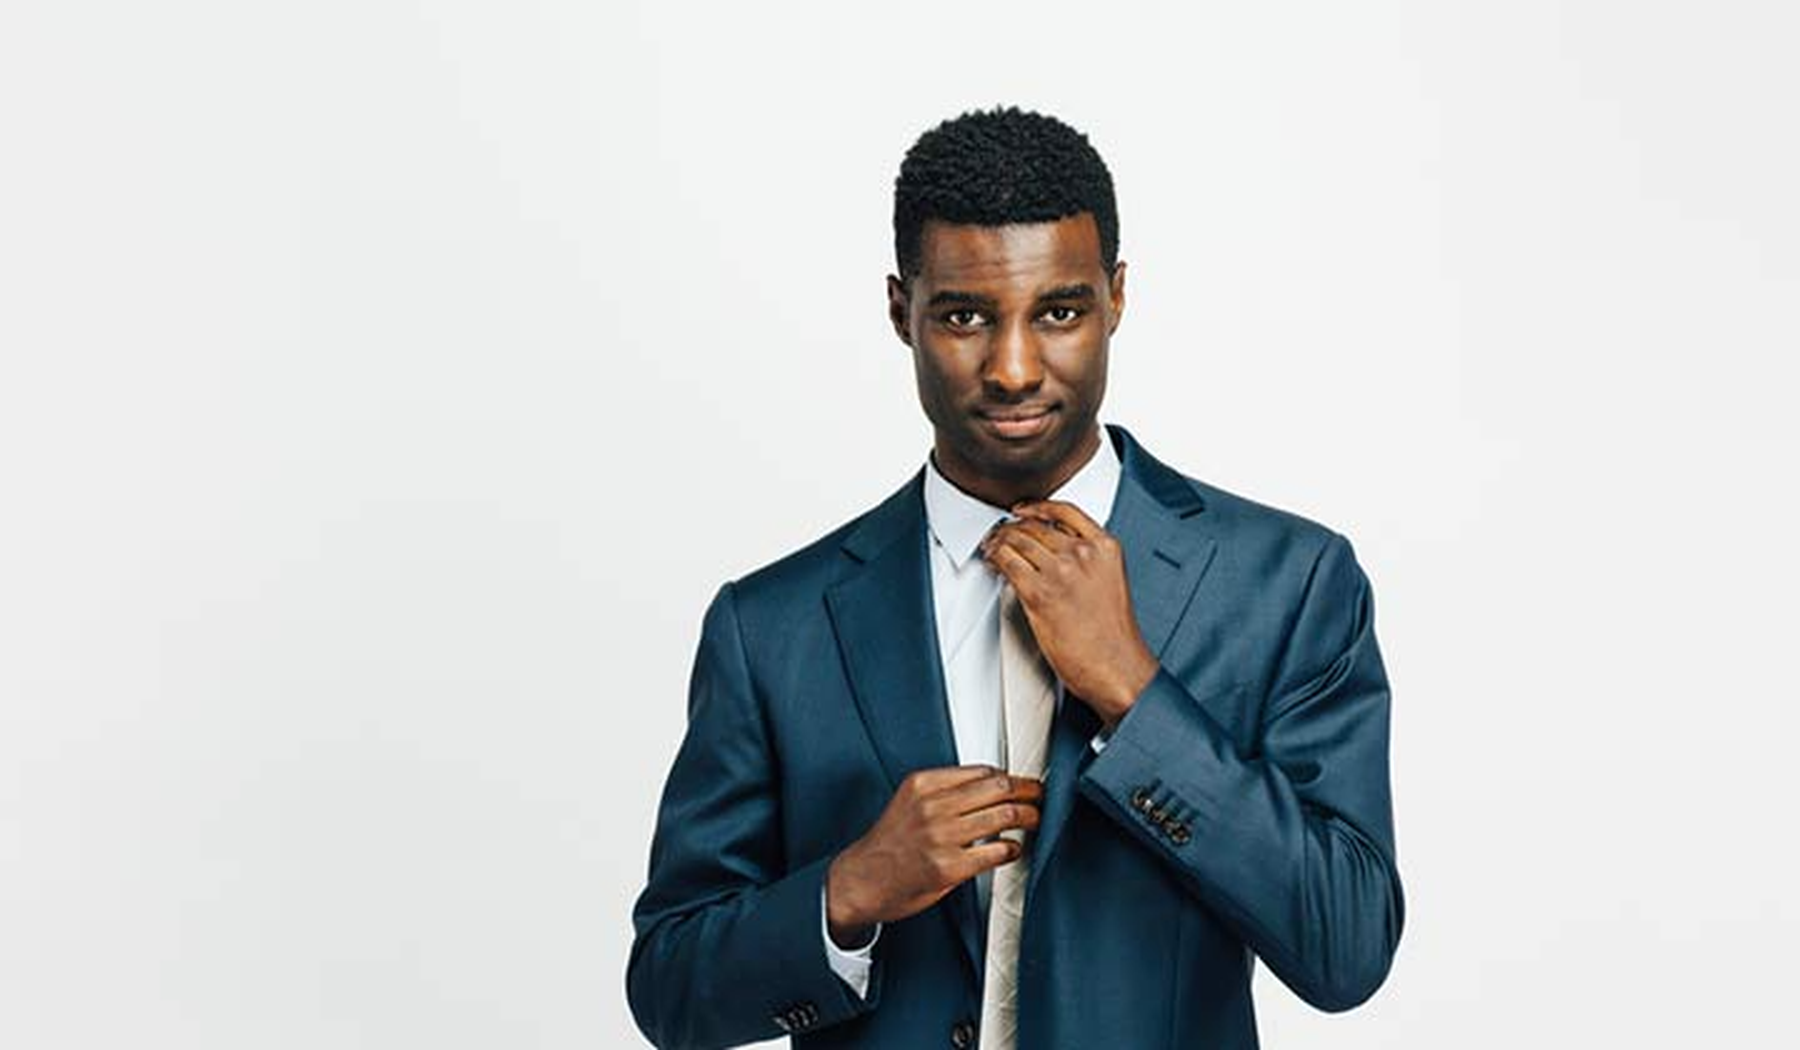 Young black man in a suit